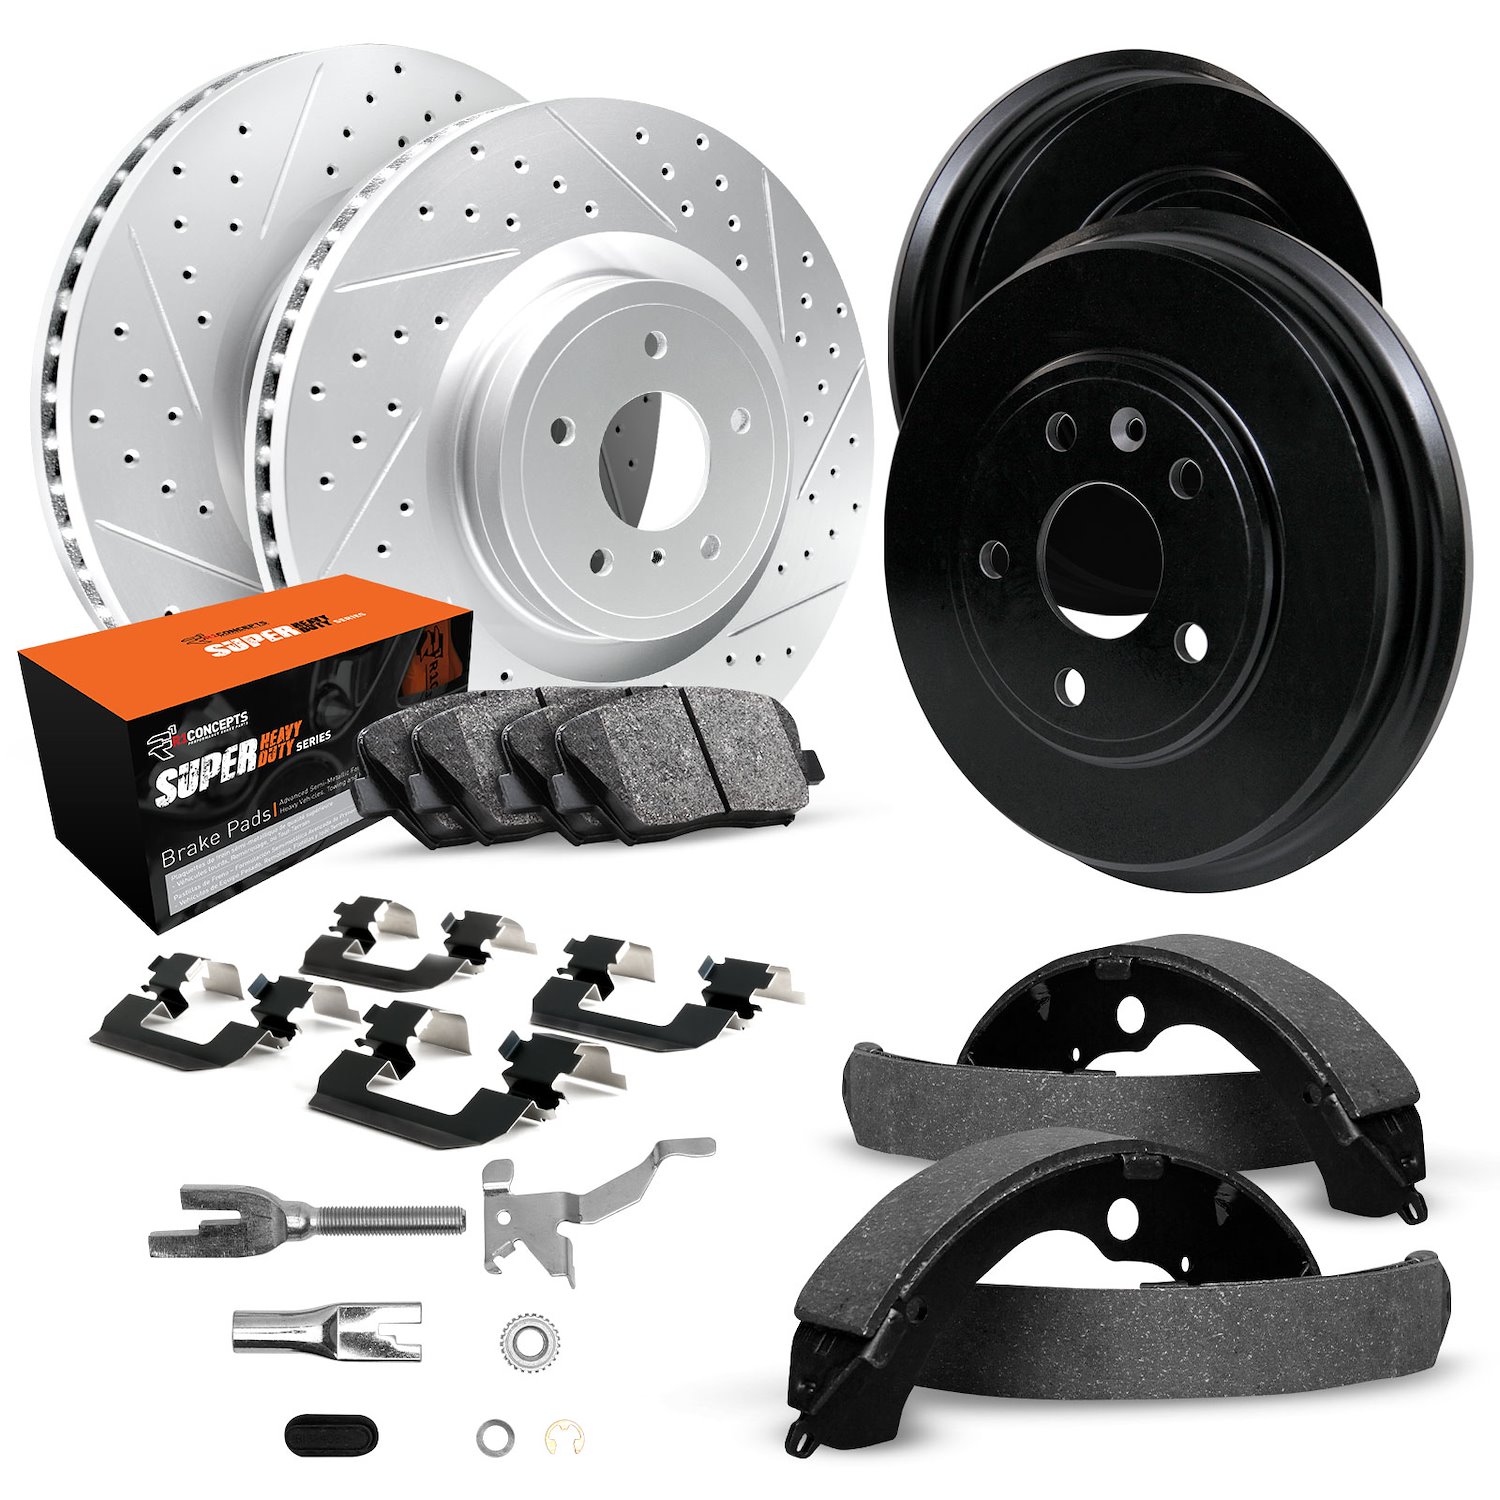 GEO-Carbon Drilled/Slotted Rotors/Drums w/Super-Duty Pads/Shoes/Hardware/Adjusters, 1974-1988 Mopar, Position: Front/Rear